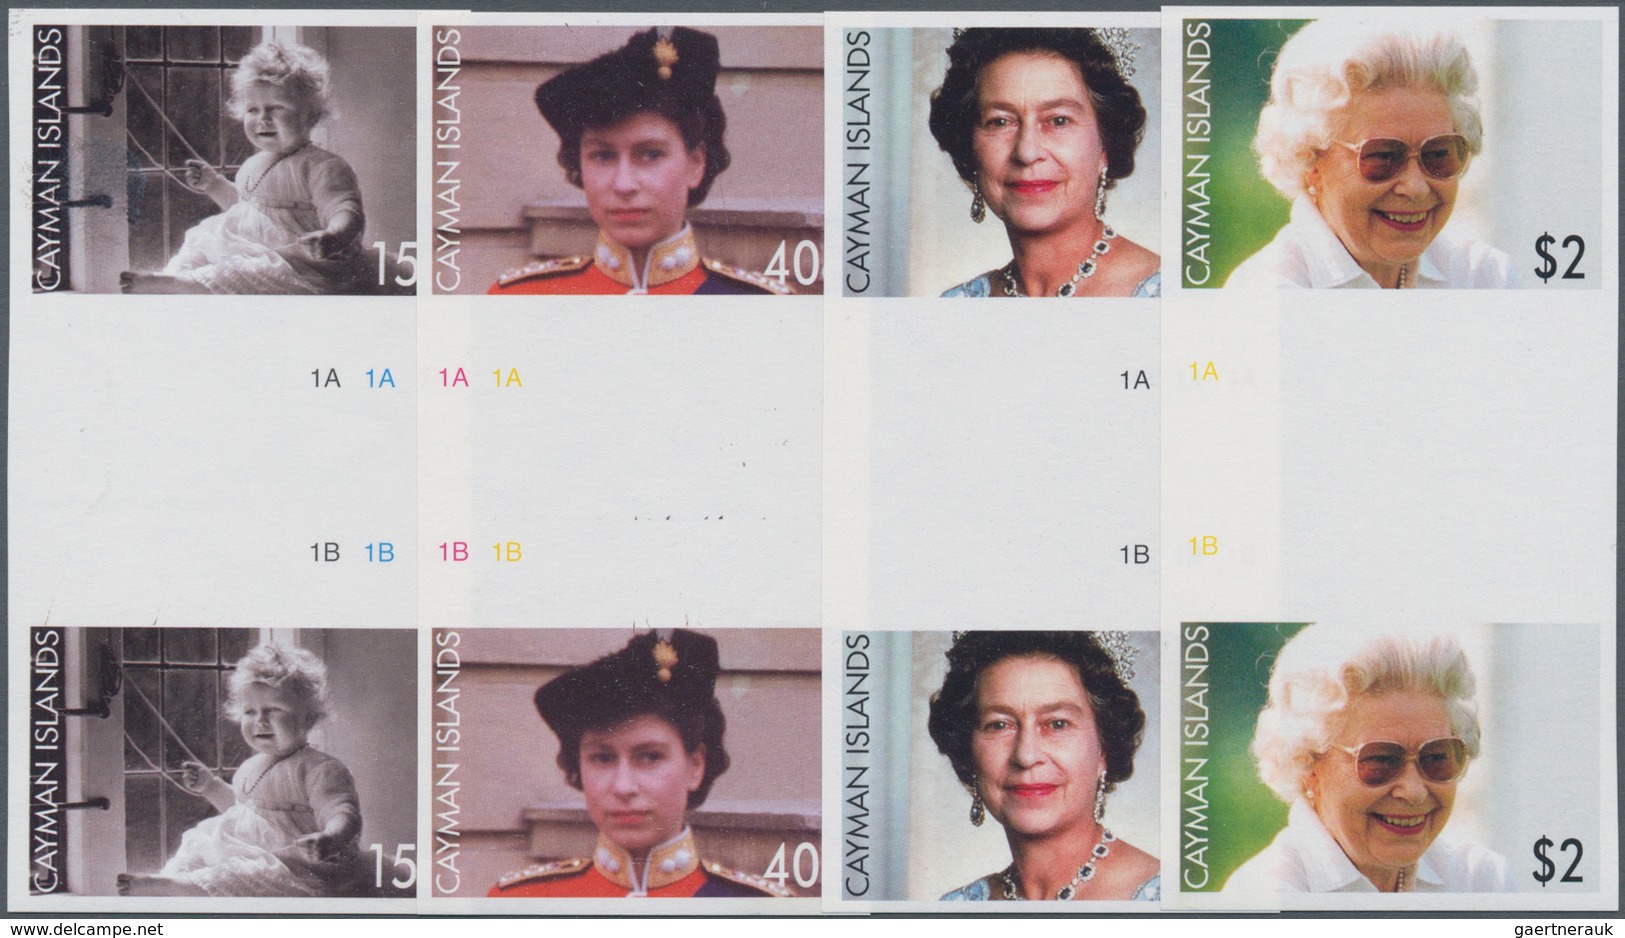 Kaiman-Inseln / Cayman Islands: 2006, 80th Birthday Of QEII Complete Set Of Four In Vertical IMPERFO - Kaimaninseln